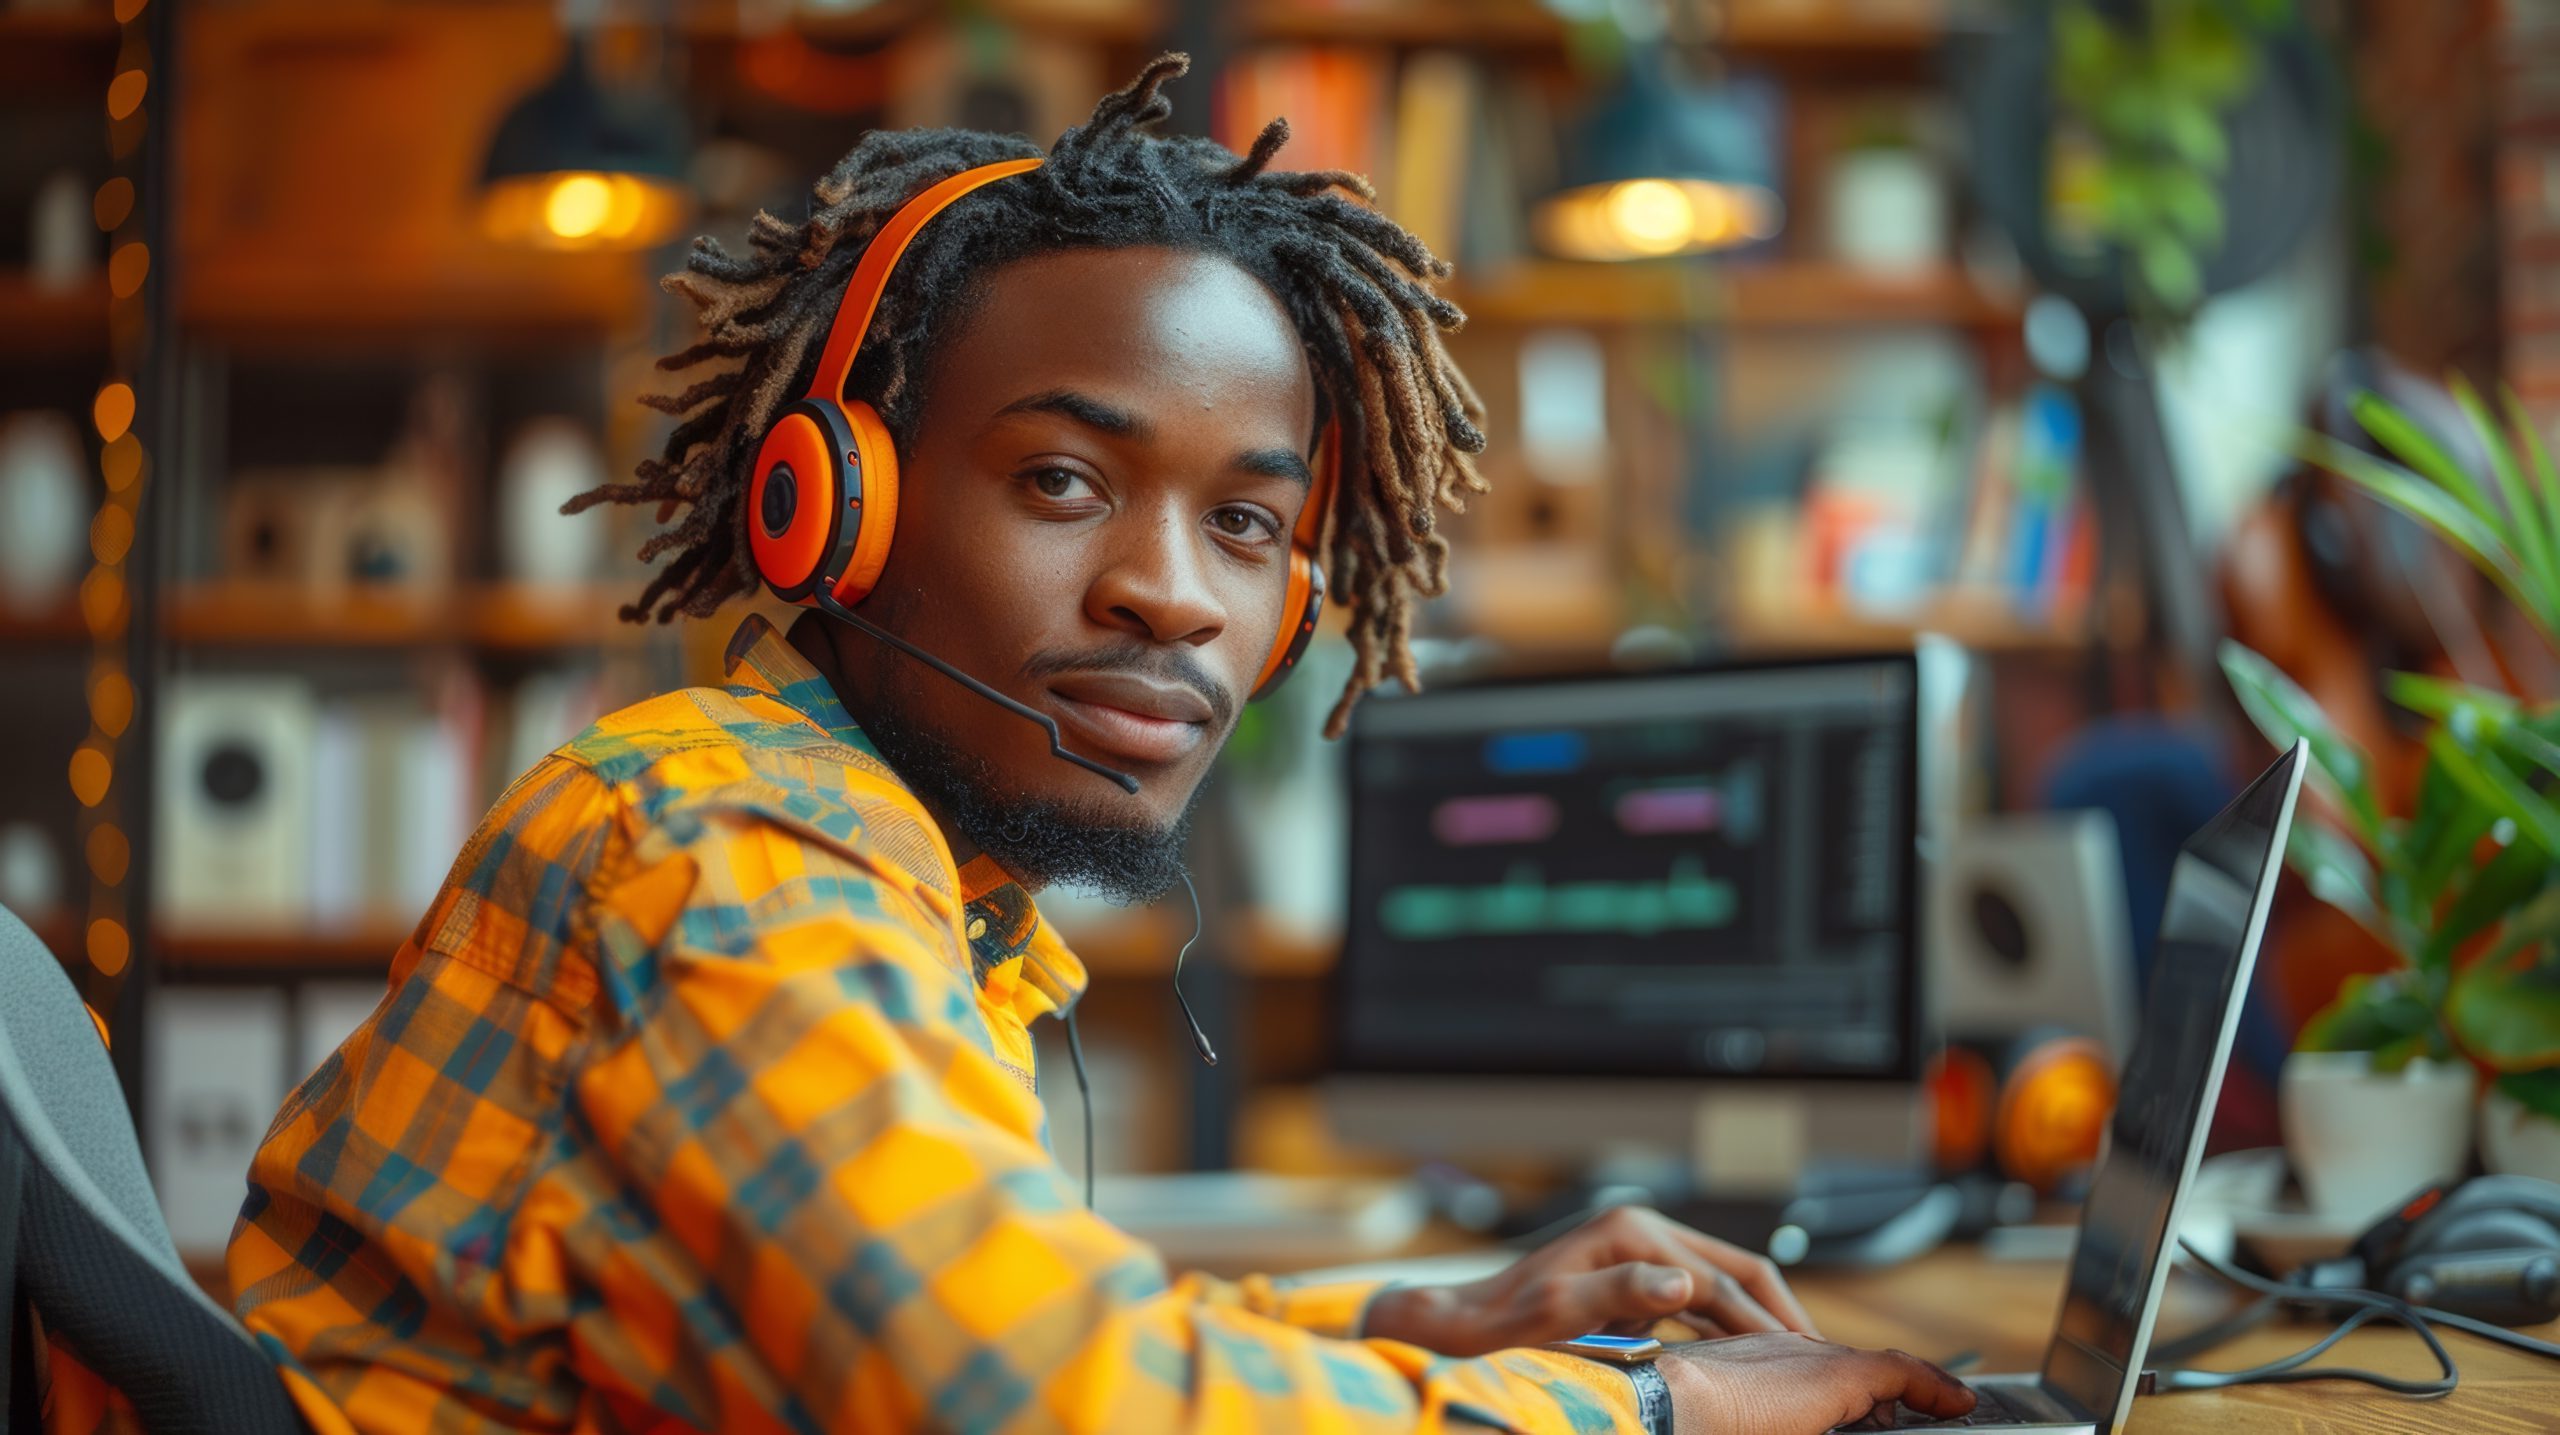 A young African American man wearing headphones works on a laptop computer in a creative office while wearing headphones